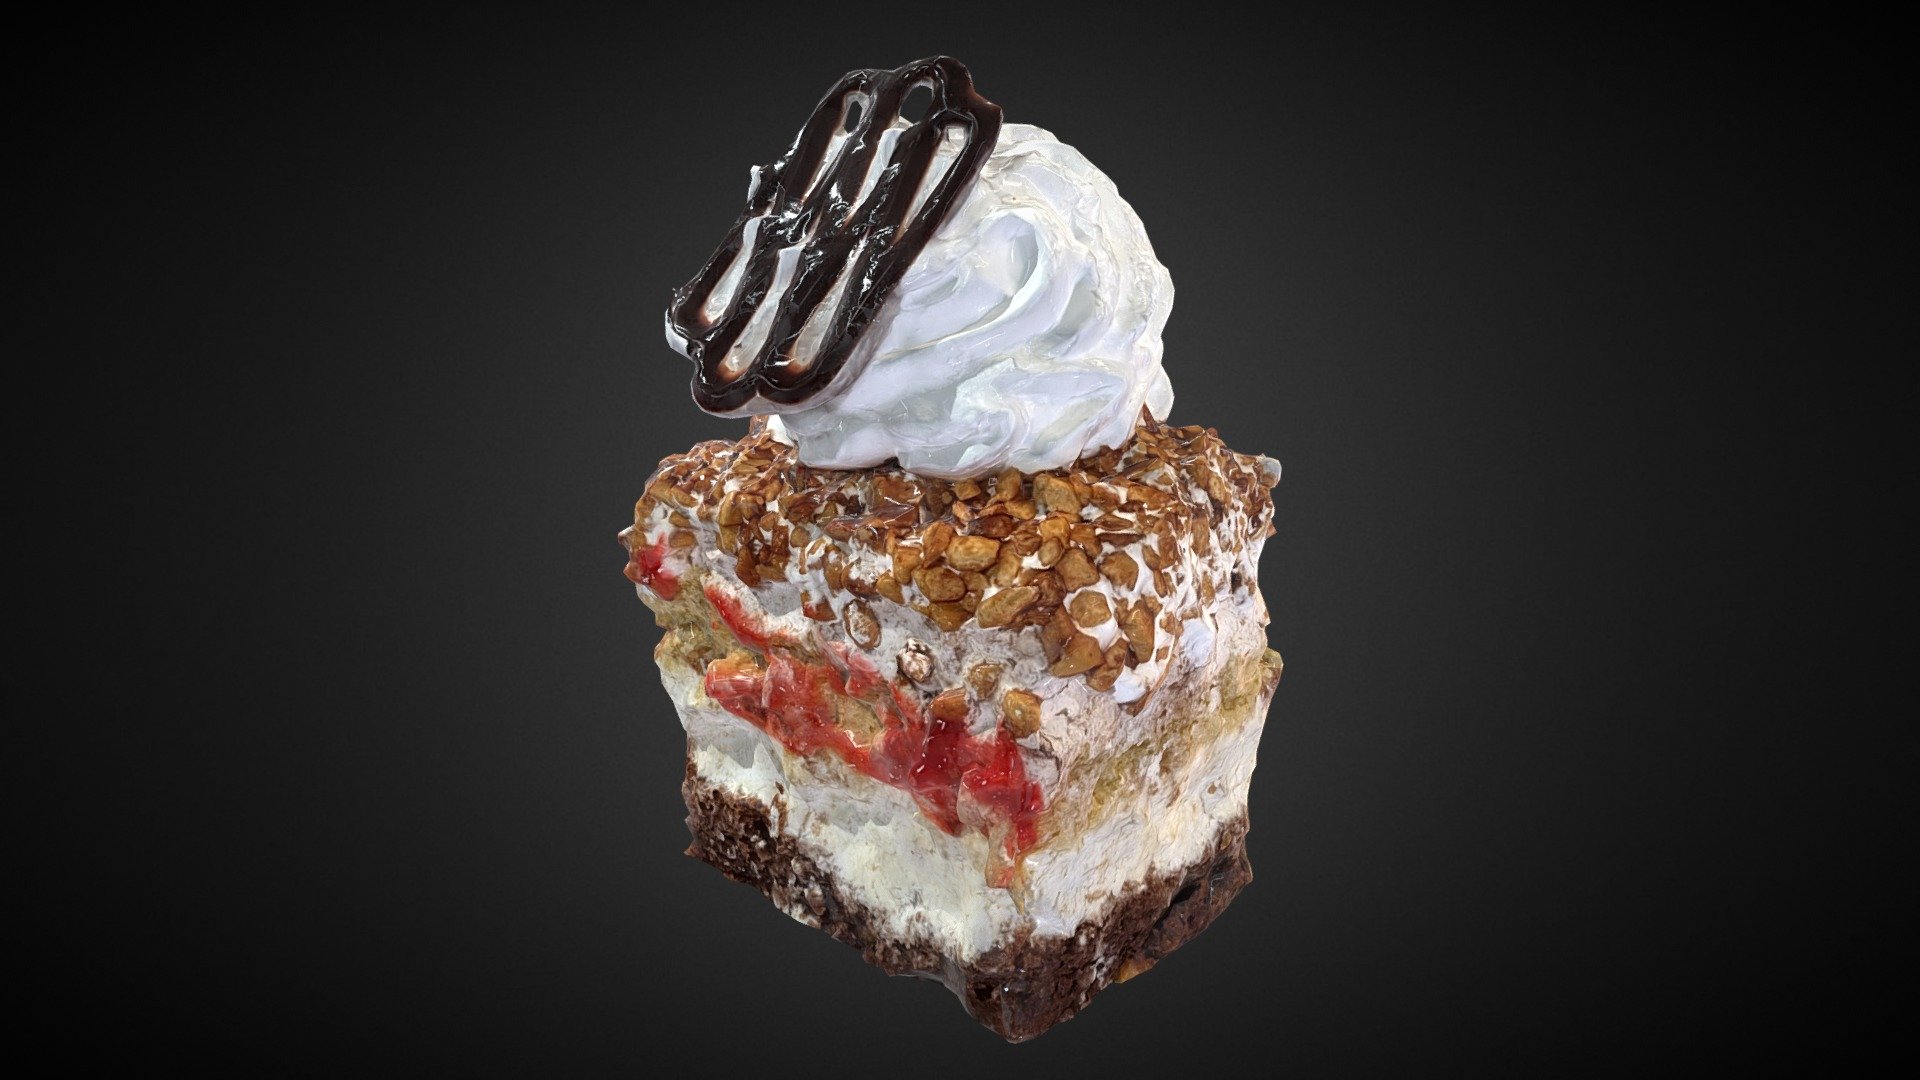 Photogrammetry of a slice of cake with whipped cream 3d model